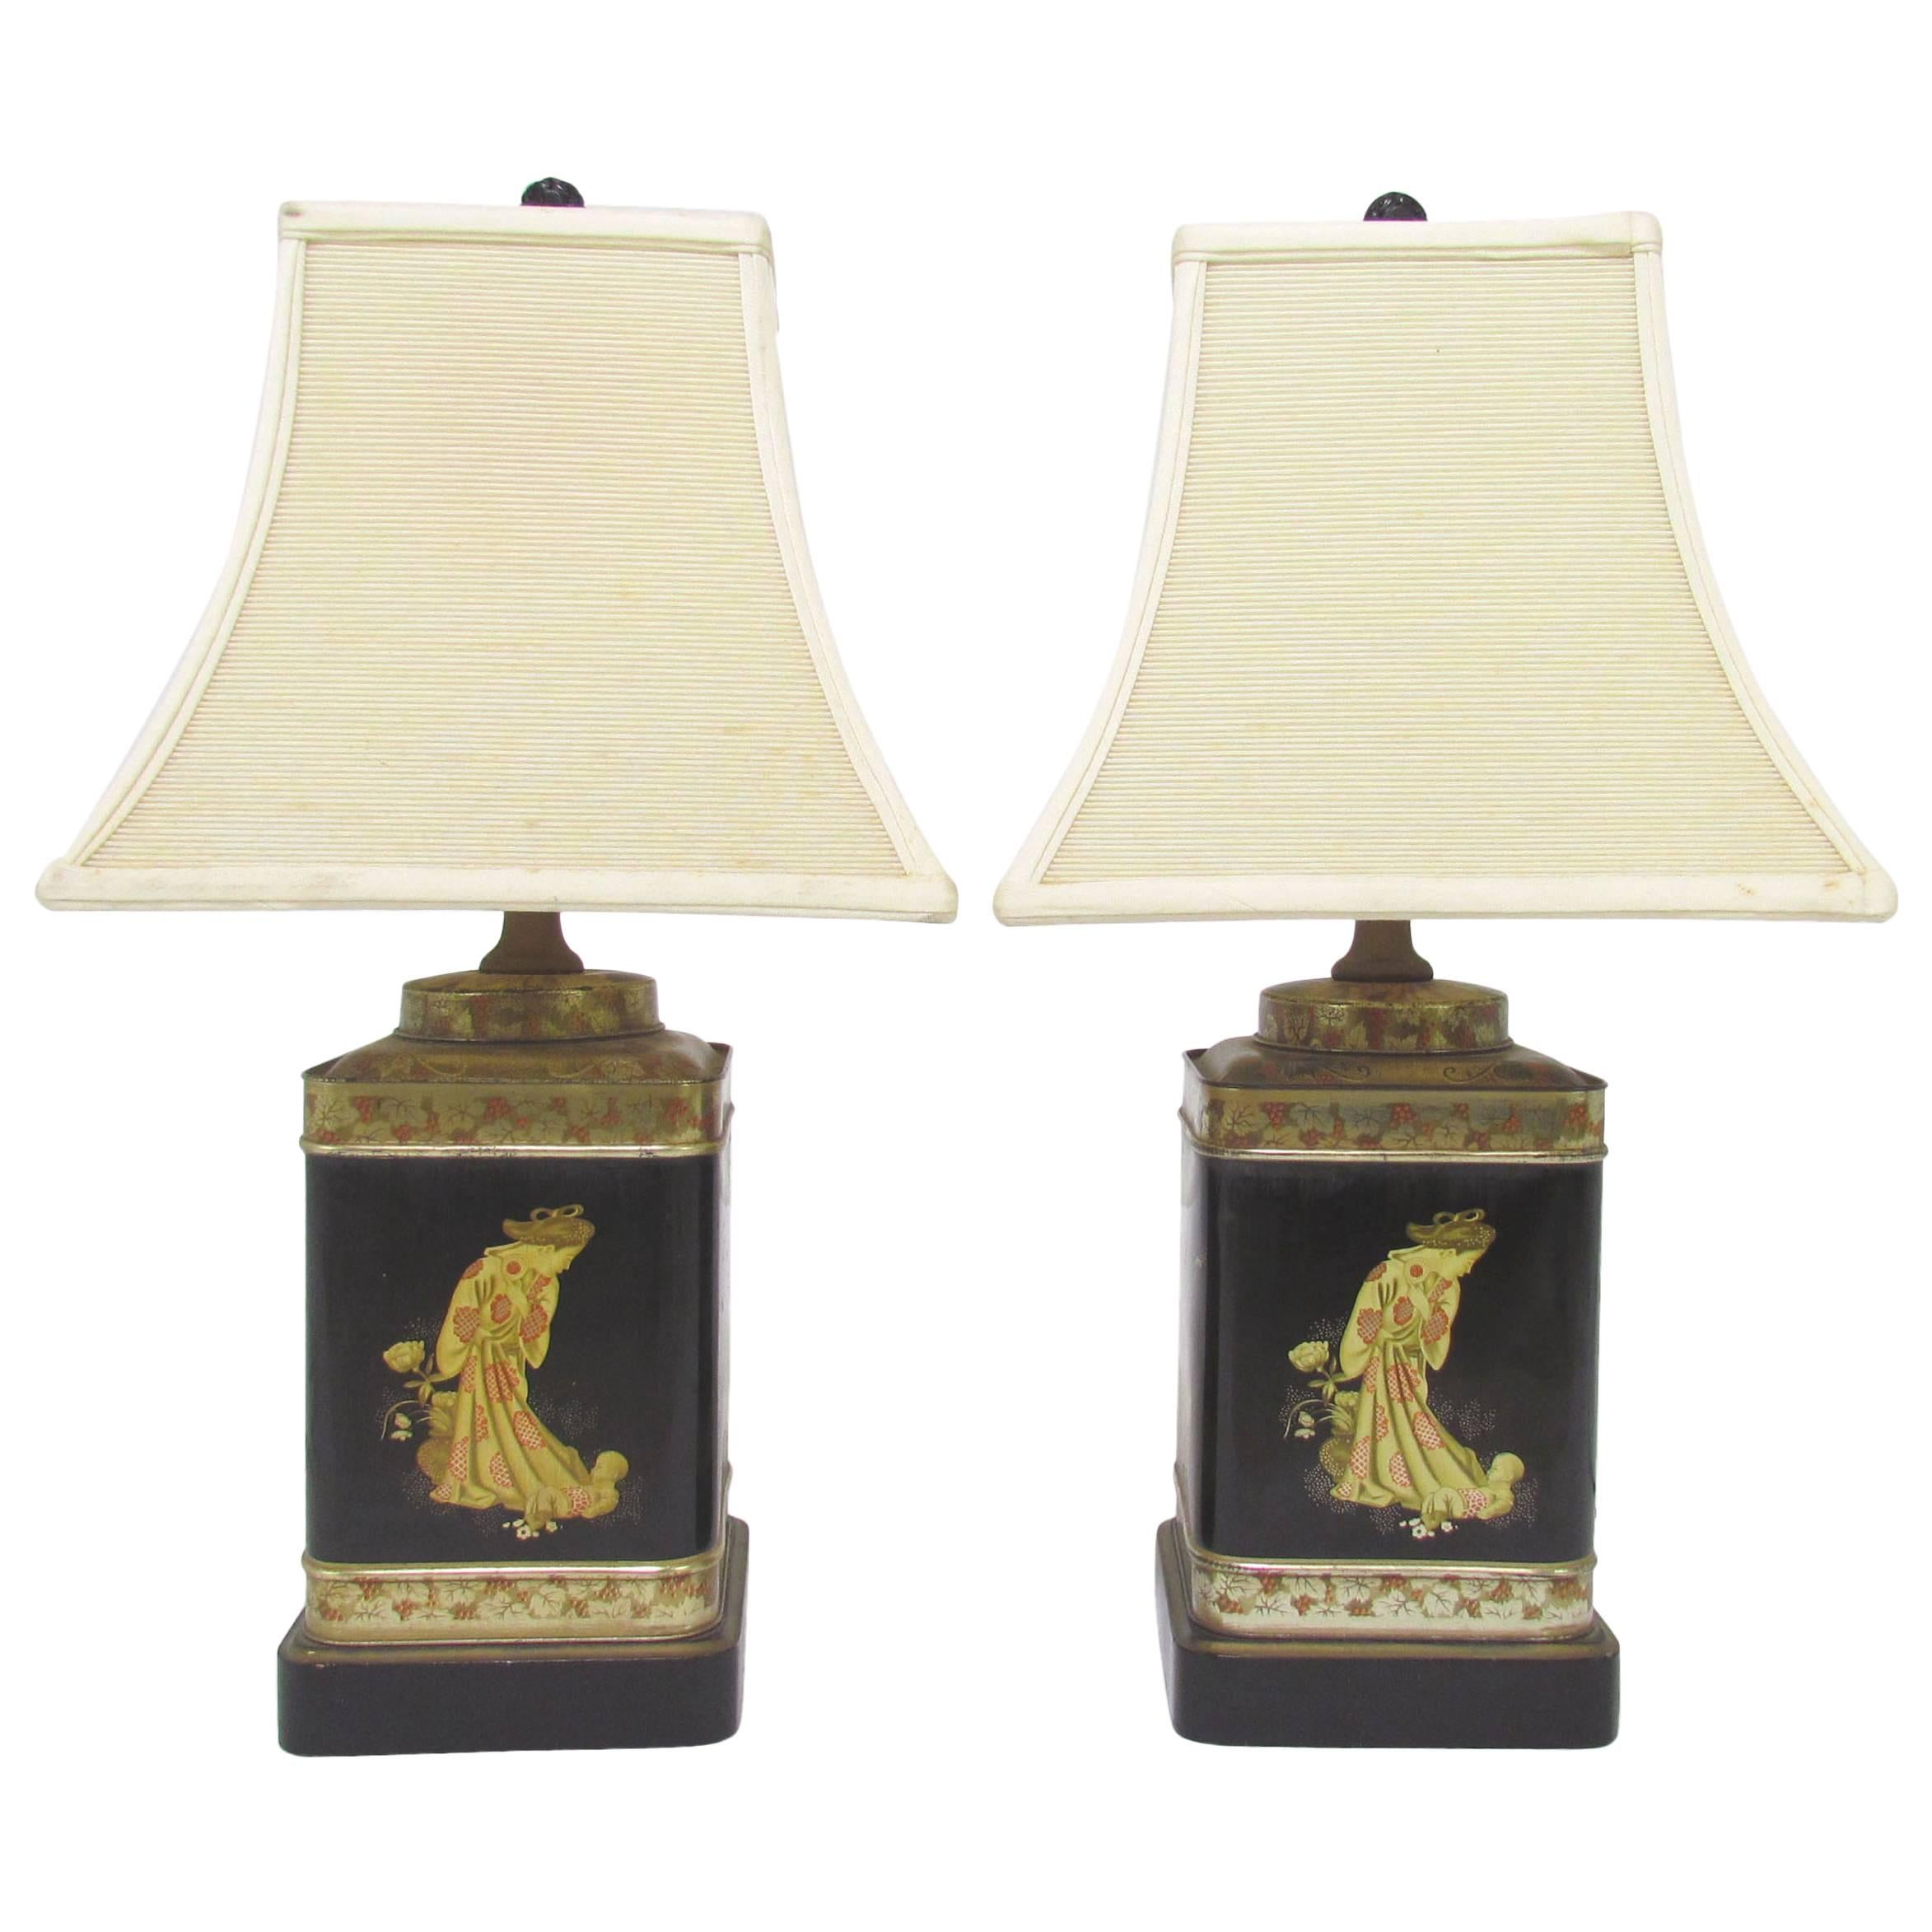 Pair of Lacquered Tea Canister Table Lamps by Frederick Cooper